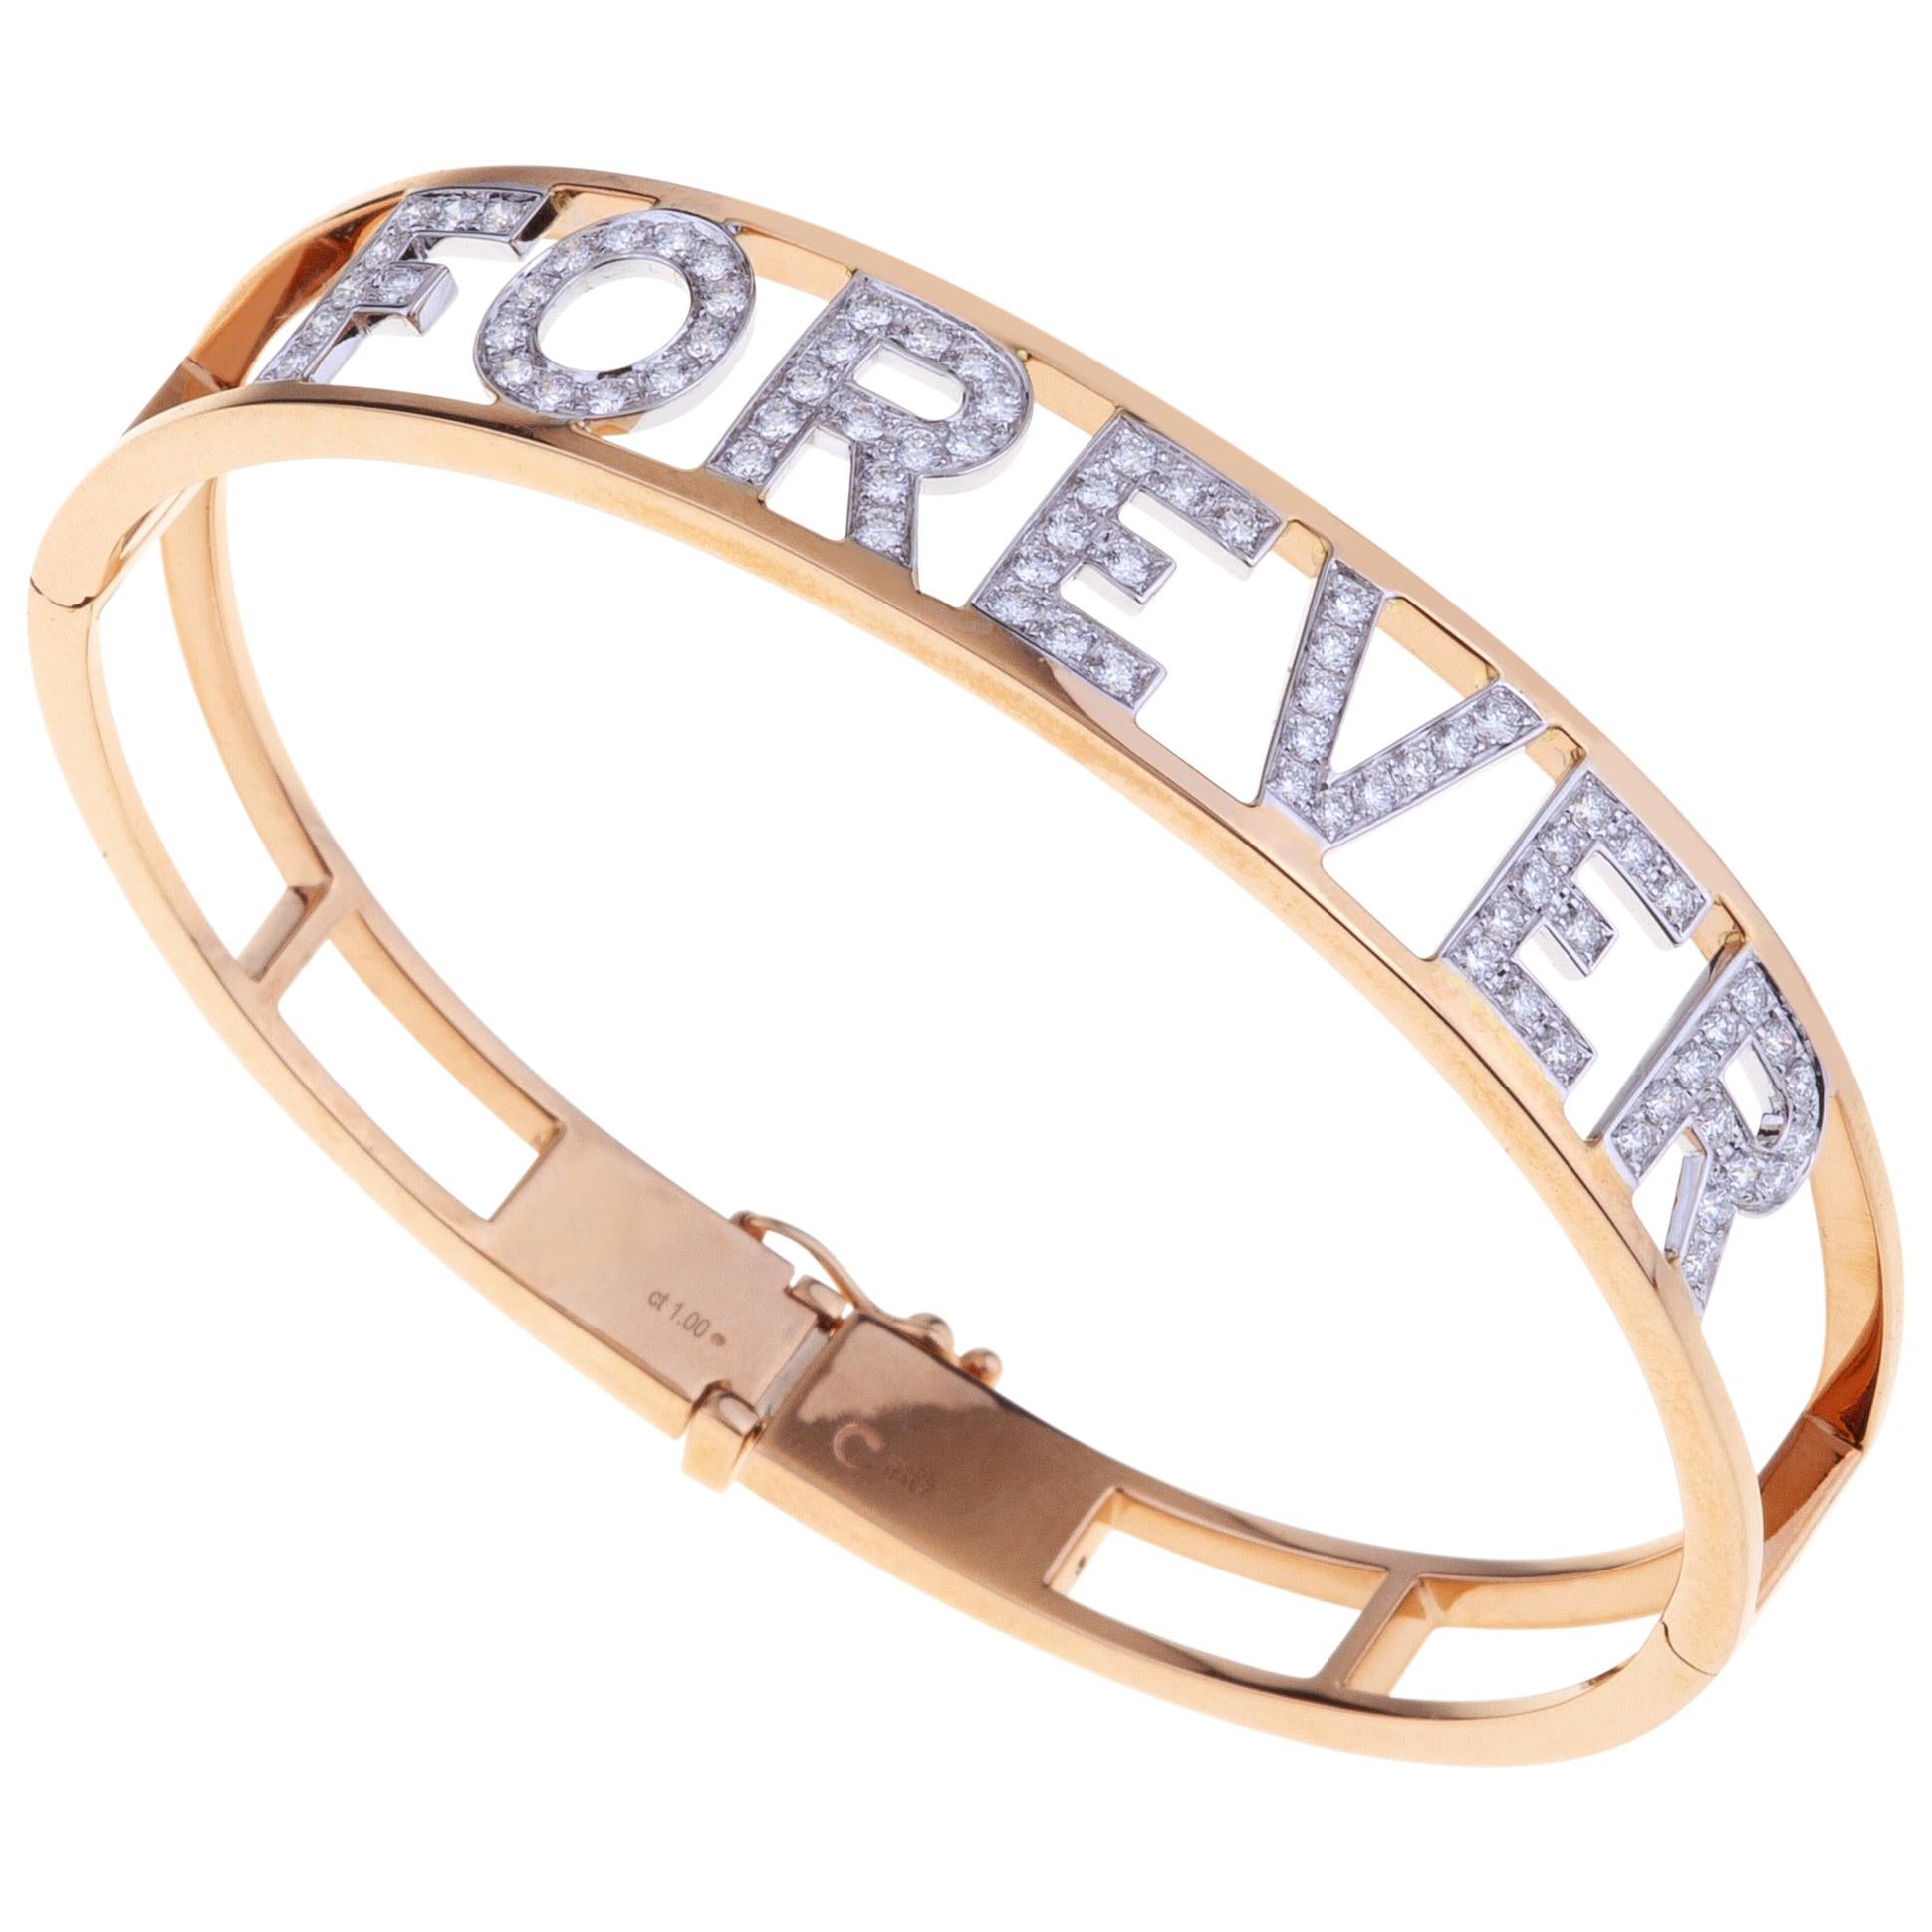 "FOREVER" Gold Bangle Bracelet with Diamonds For Sale